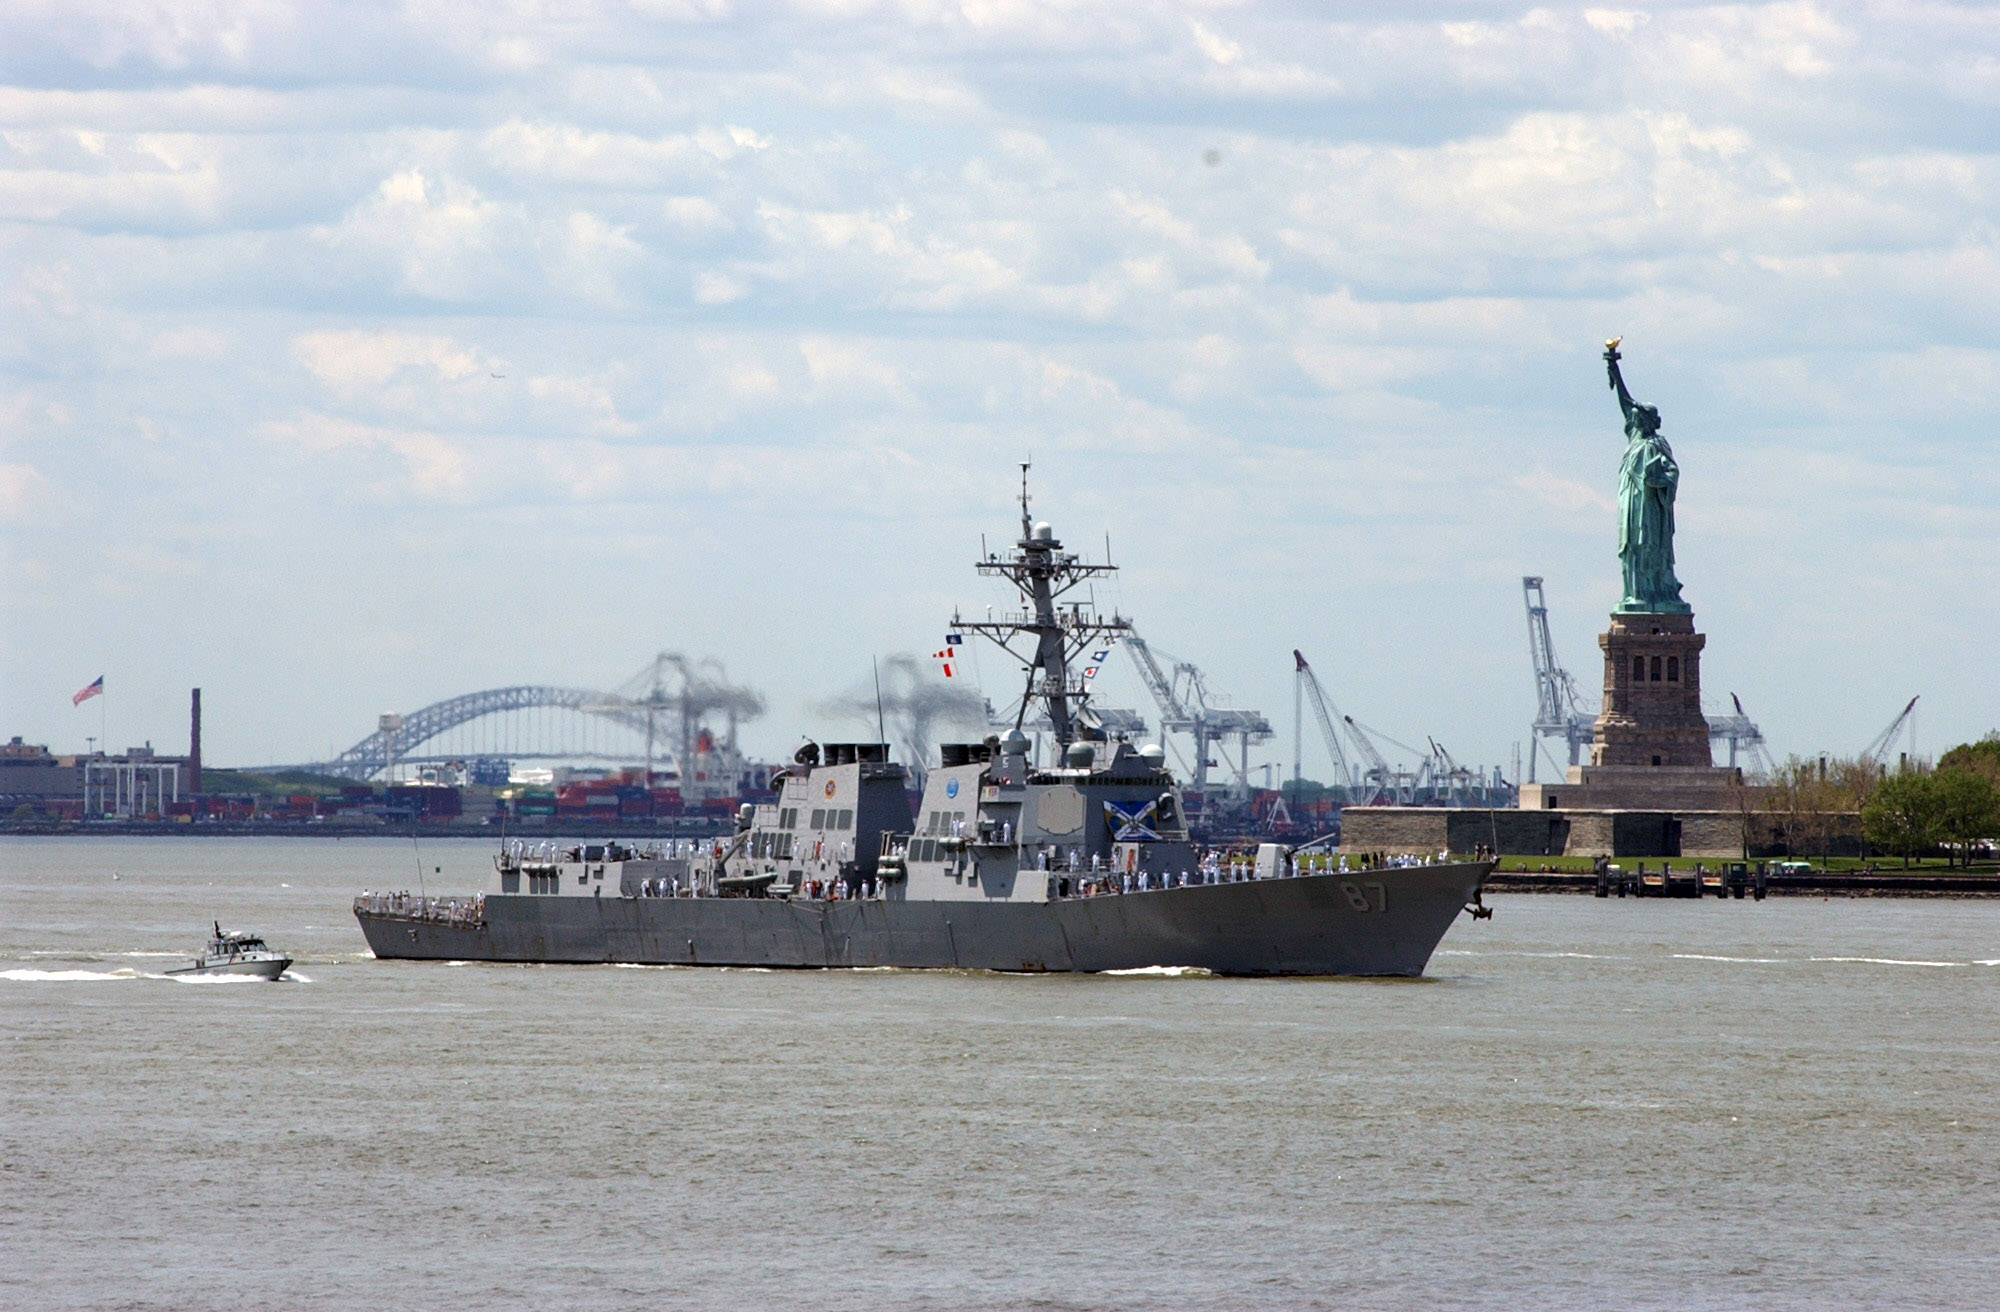 US_Navy_060524-N-4936C-005_The_guided-missile_destroyer_USS_Mason_%28DDG_87%29_sails_pass_the_Statue_of_Liberty_in_New_York_Harbor_headed_for_a_Manhattan_pier_to_participate_in_the_19th_Annual_Fleet_Week_New_York_City.jpg